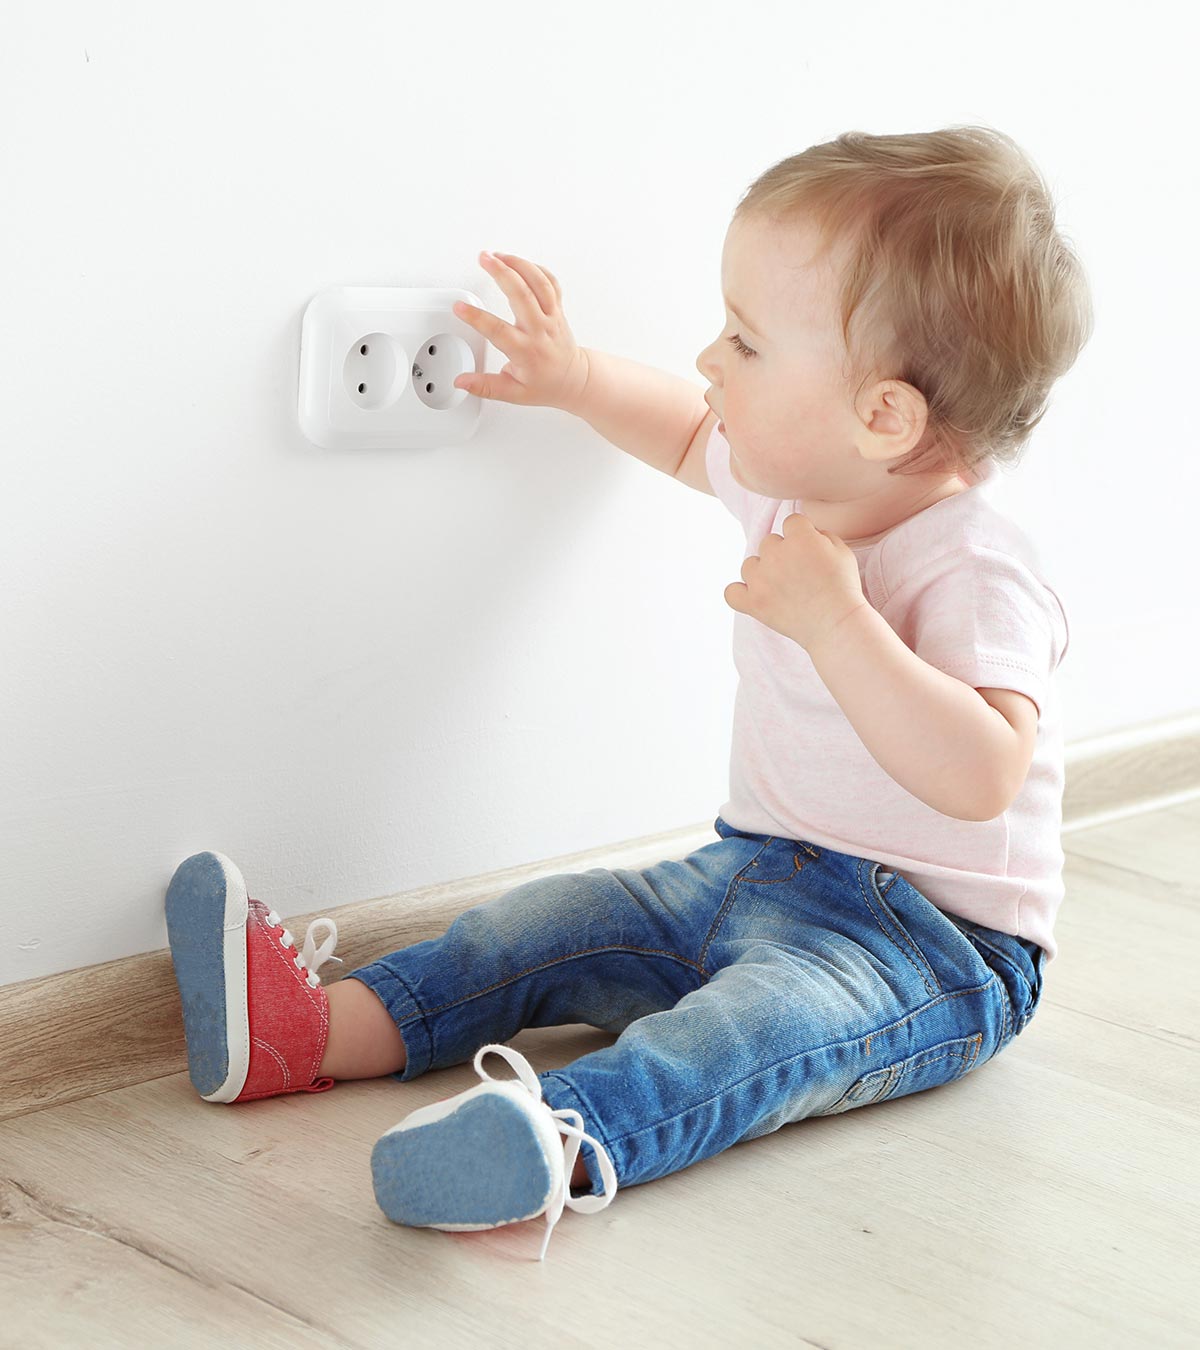 HOME SOCKET PLUG SAFETY COVERS BABY & CHILD PROOF 3 PIN PROOF GUARD PROTECT